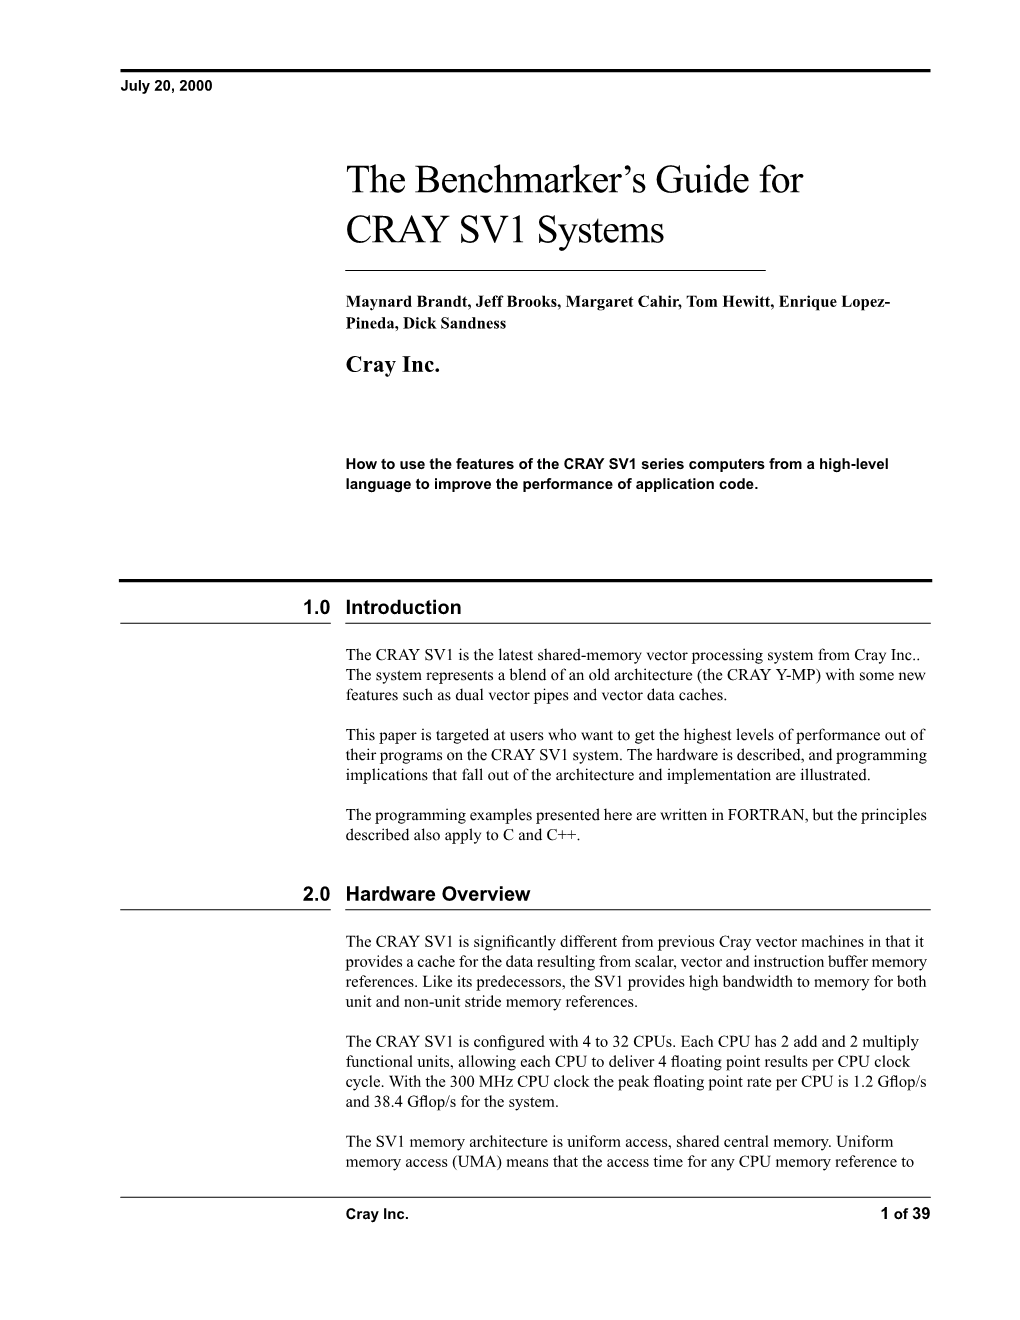 The Benchmarker's Guide for CRAY SV1 Systems